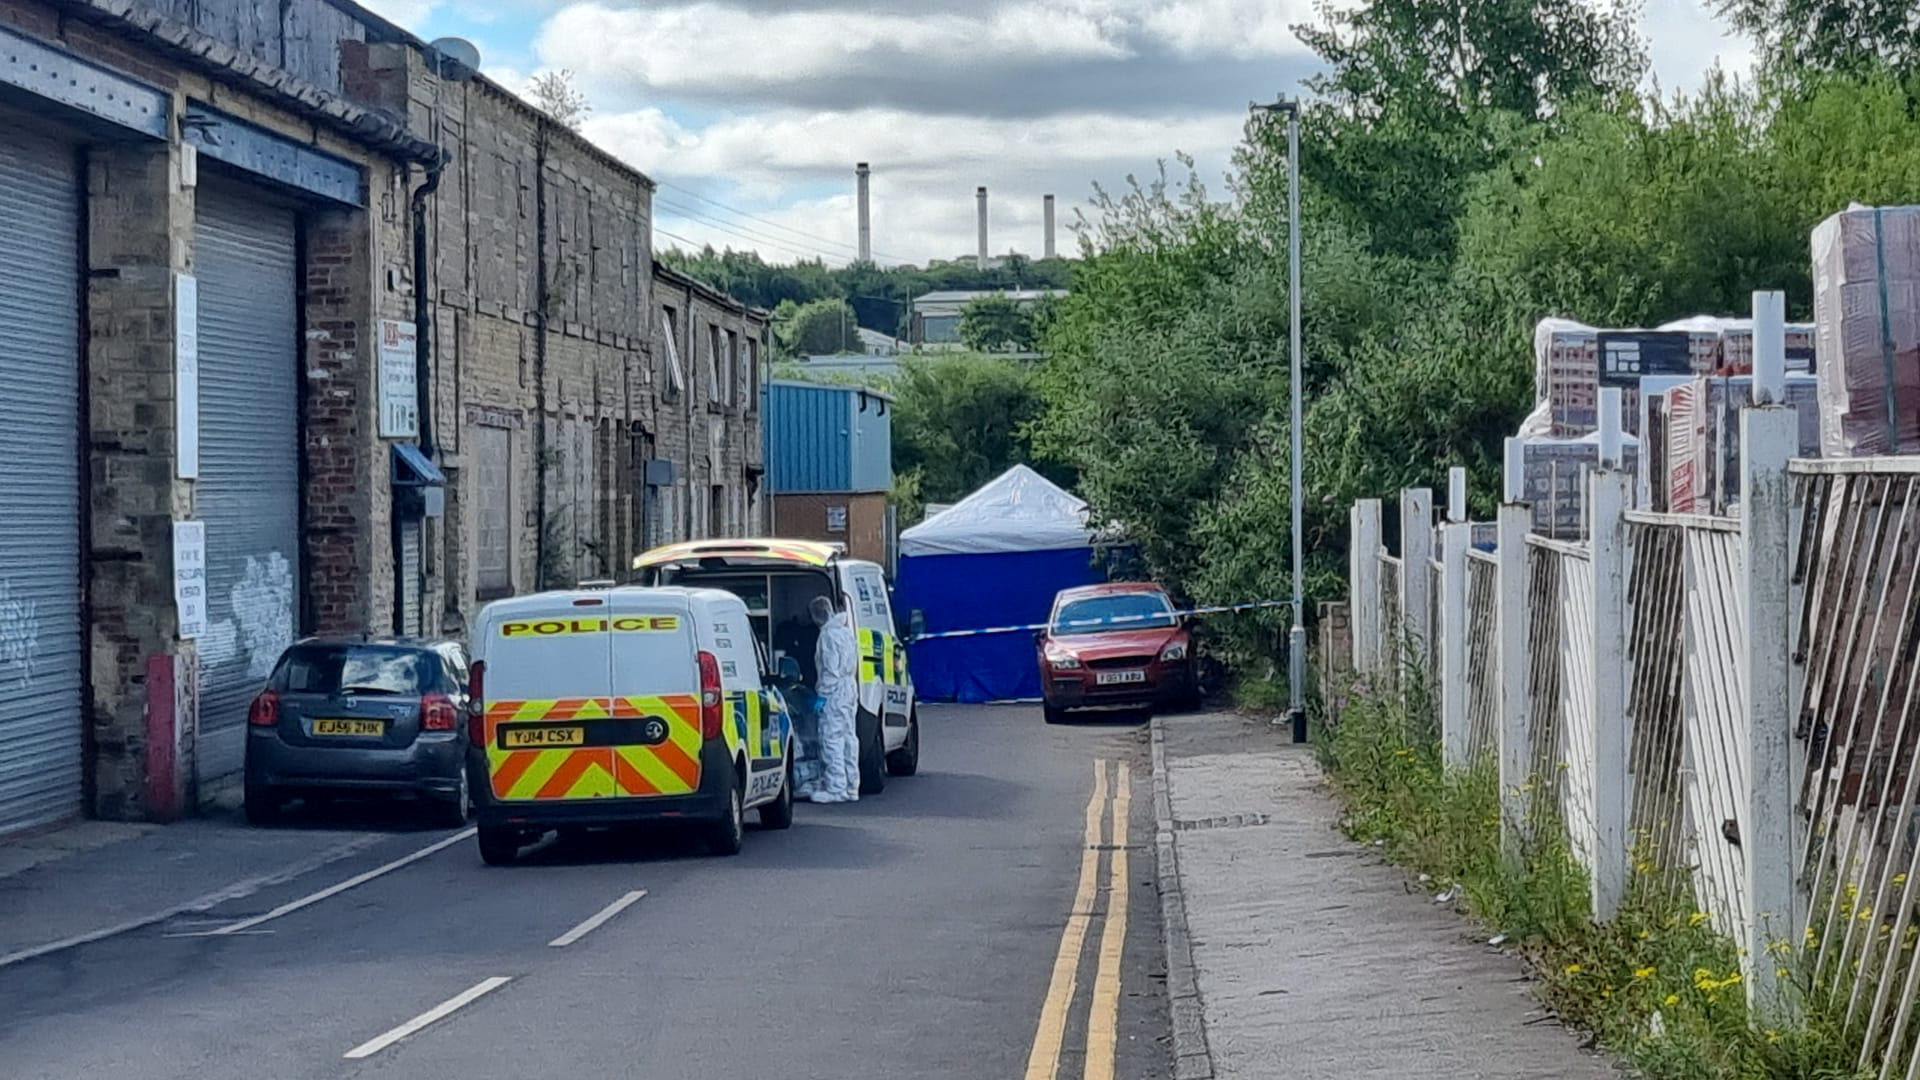 Police investigated the scene of the crime in West Yorkshire